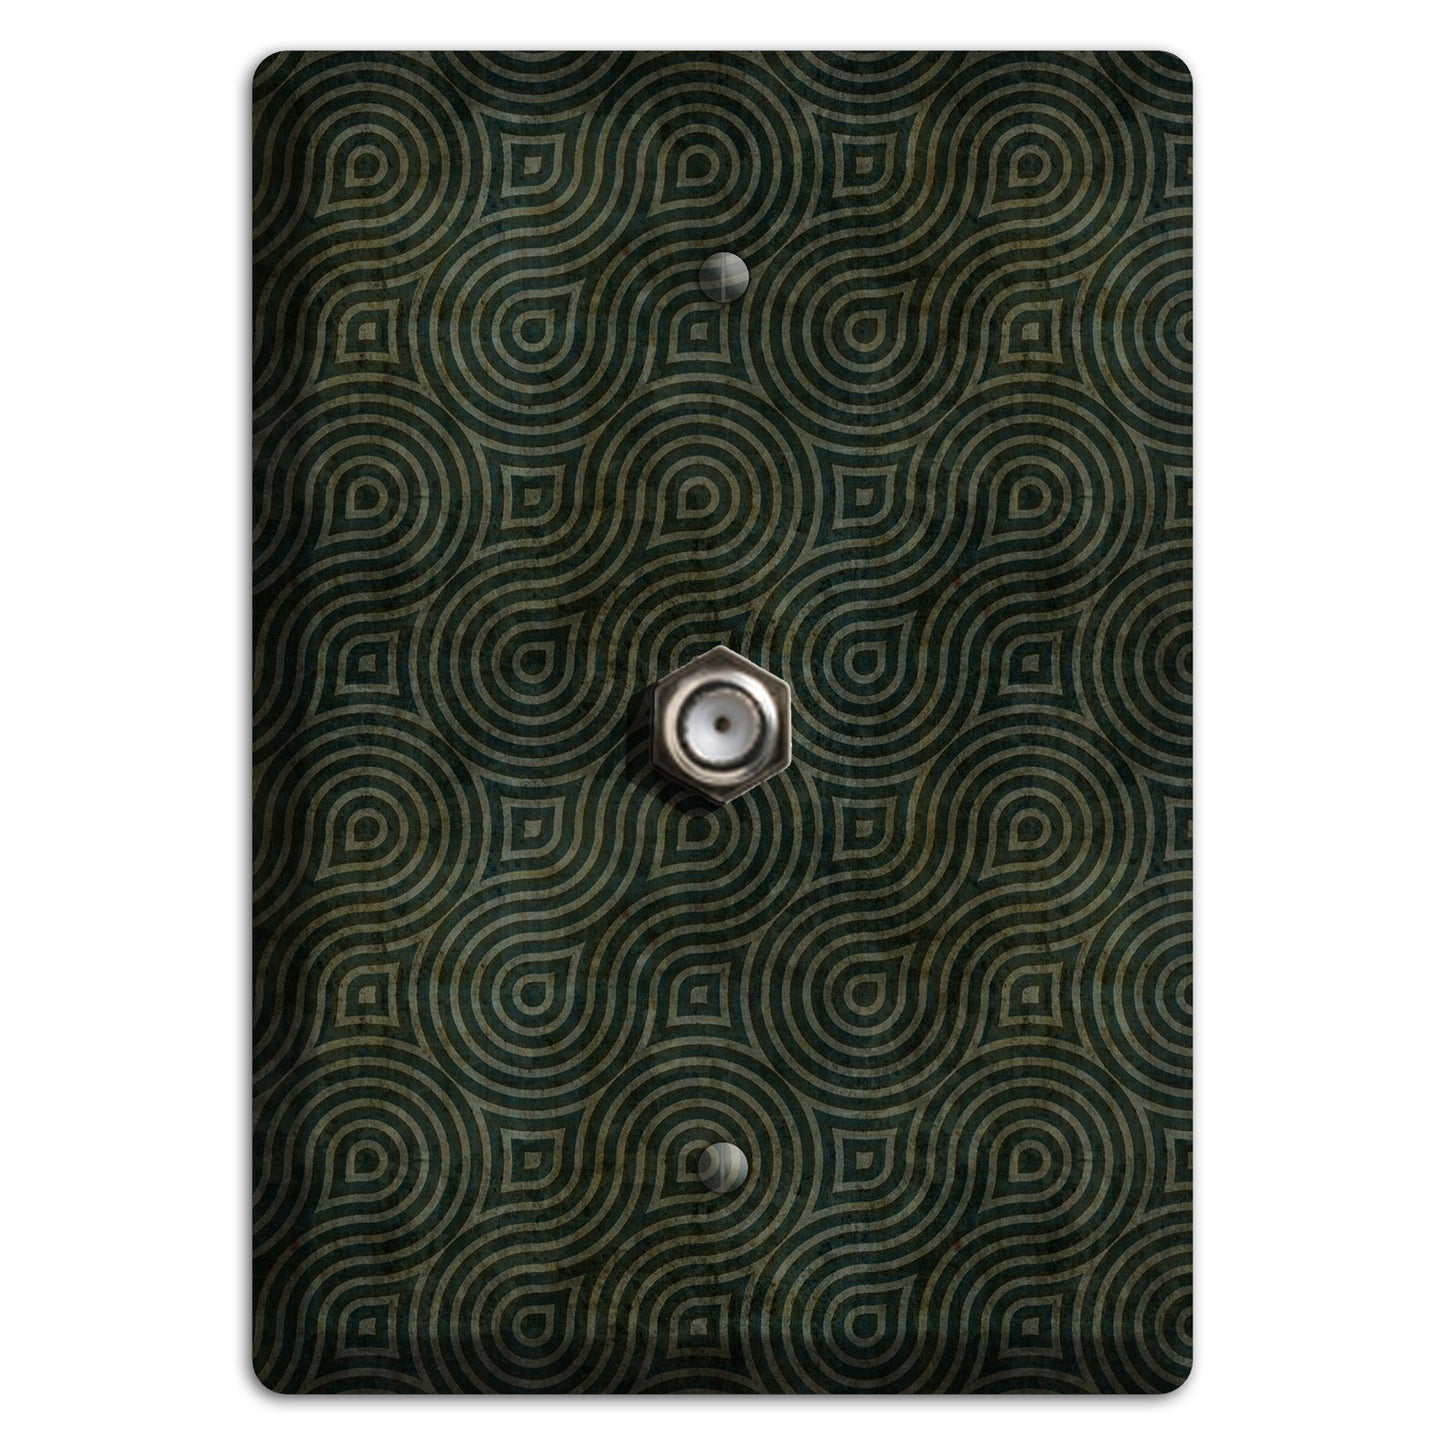 Green and Black Swirl Cable Wallplate